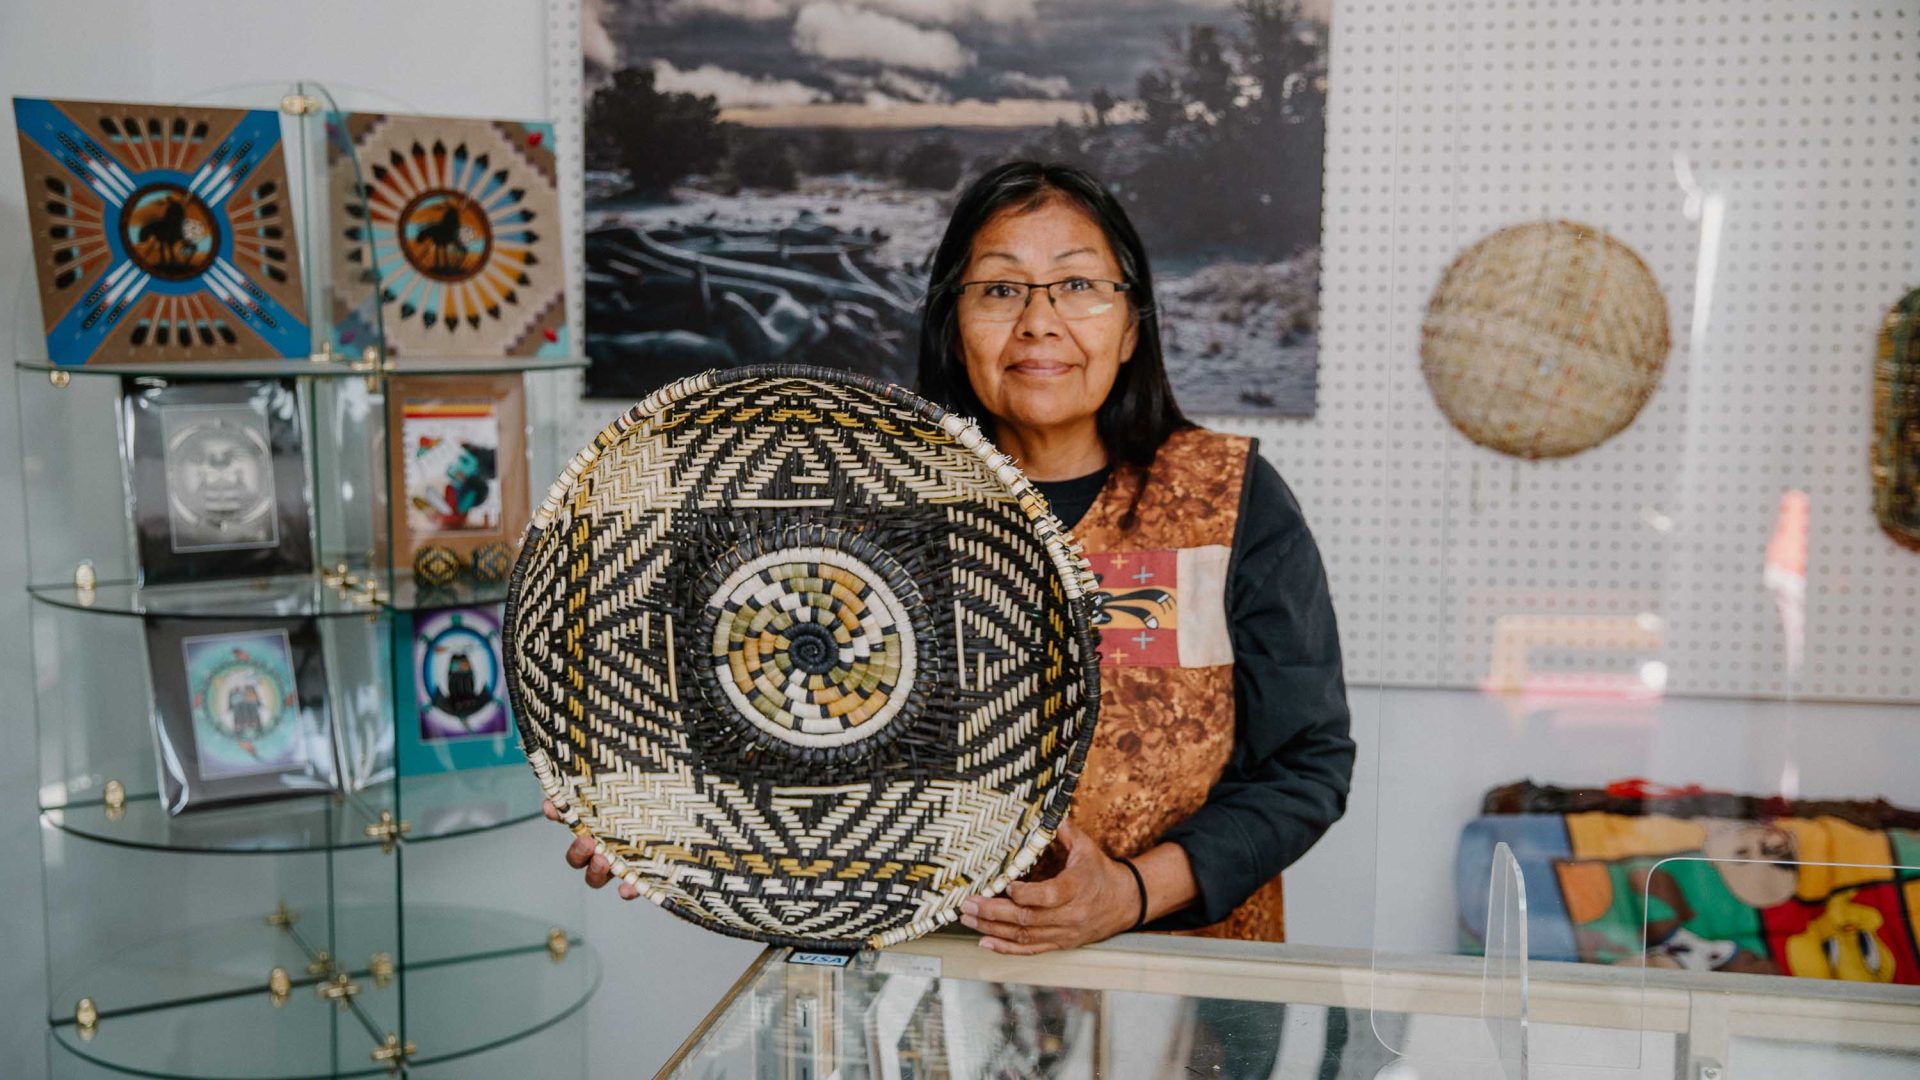 Future-proofing: How Arizona’s Hopi Arts Trail is preserving Indigenous heritage for the next generation